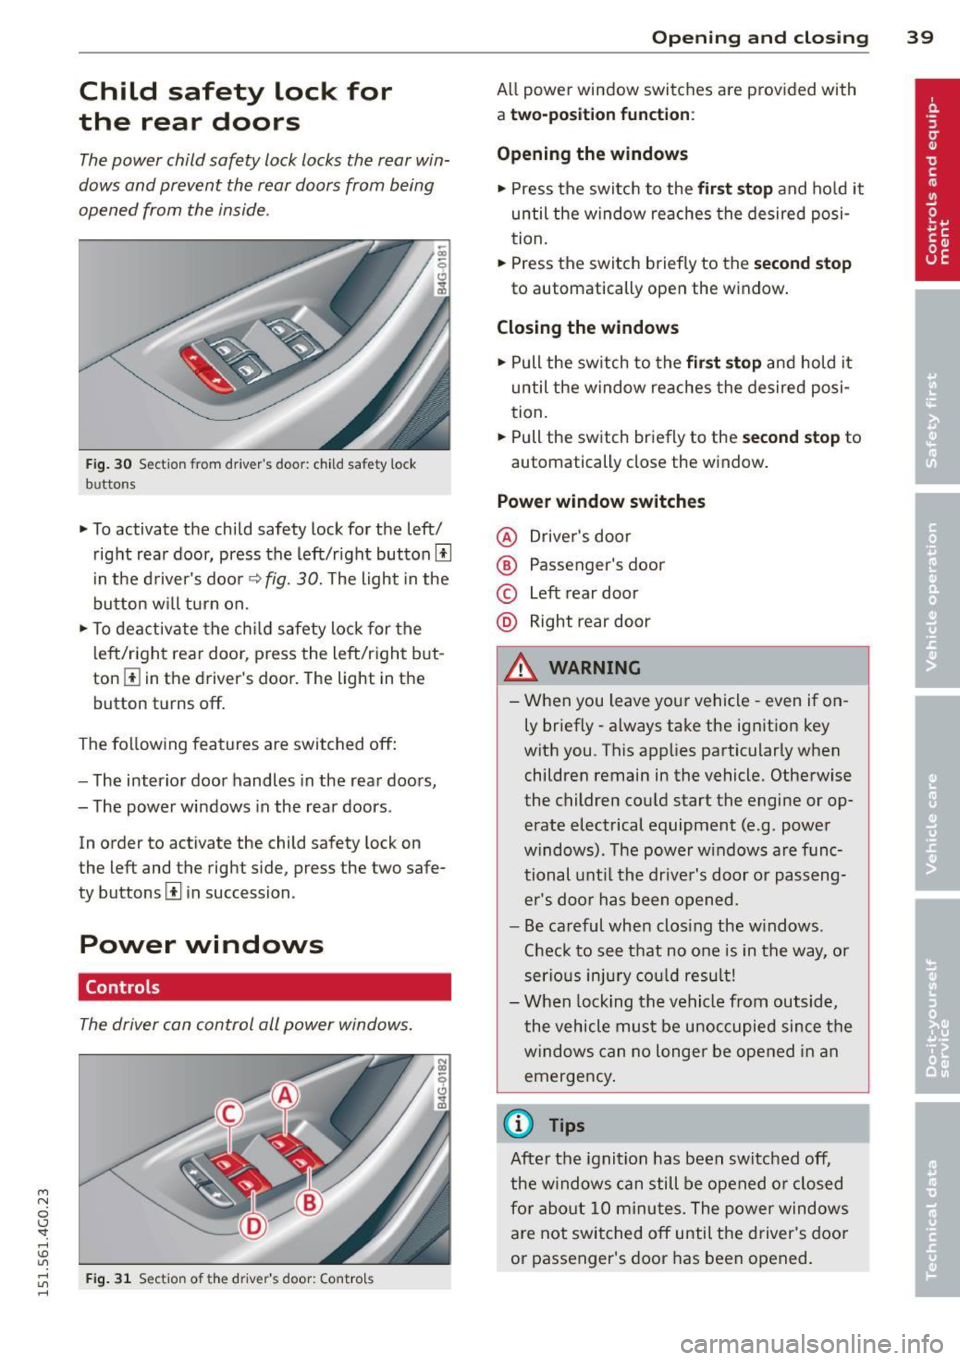 AUDI A6 2015 Service Manual M N 
0 I.J "". rl I.O 
" rl 
" rl 
Child  safety  lock  for 
the  rear  doors 
The power  child safety  lock locks  the  rear  win­
dows  and  prevent  the  rear doors  from  being 
opened  from  t